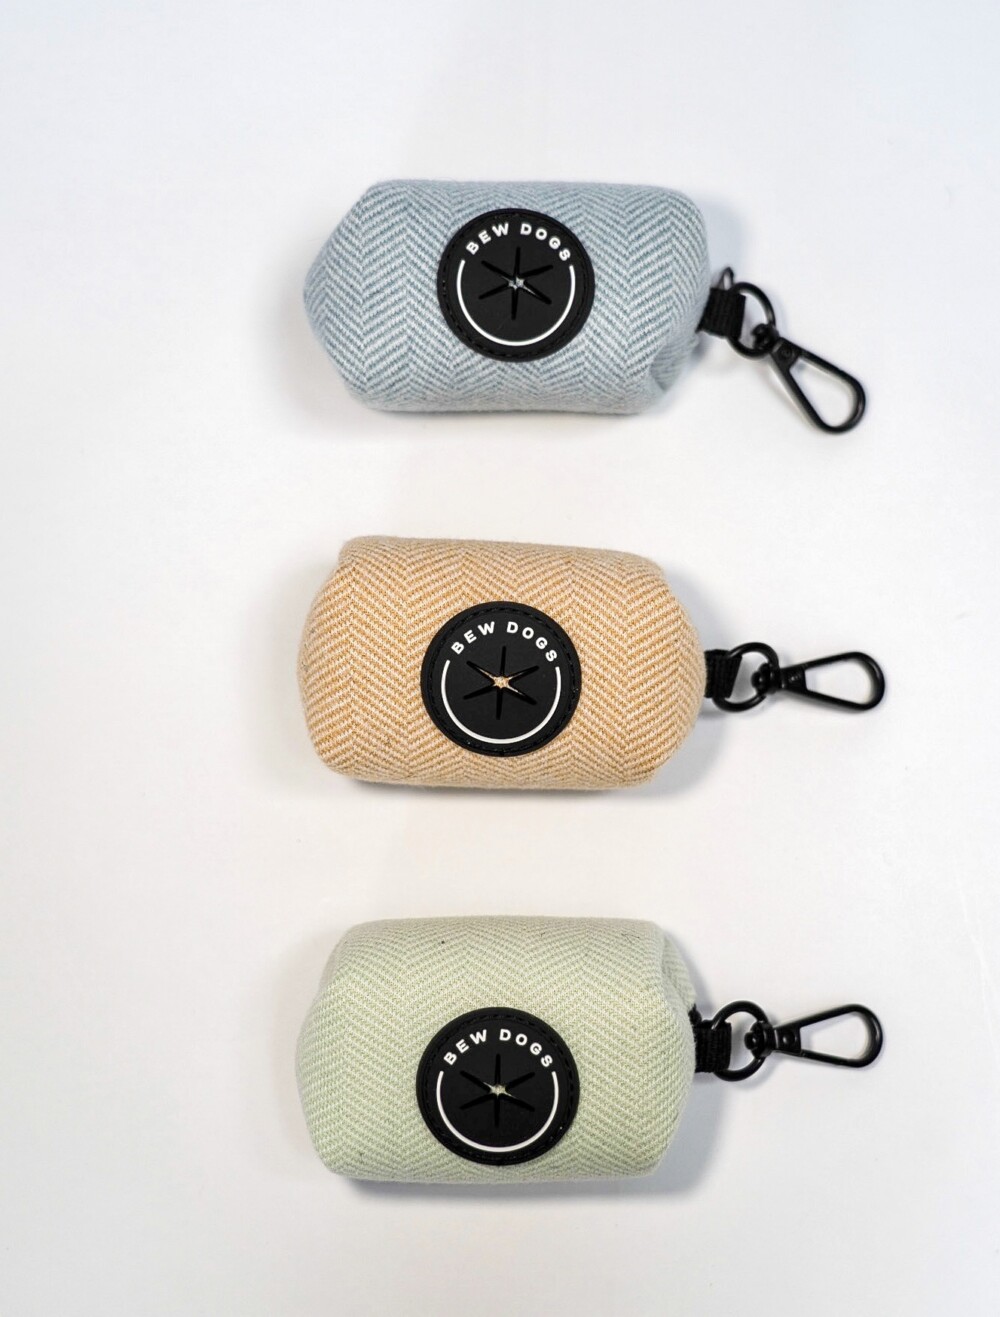 Three holders with clips to store poop bags in green, blue and cream